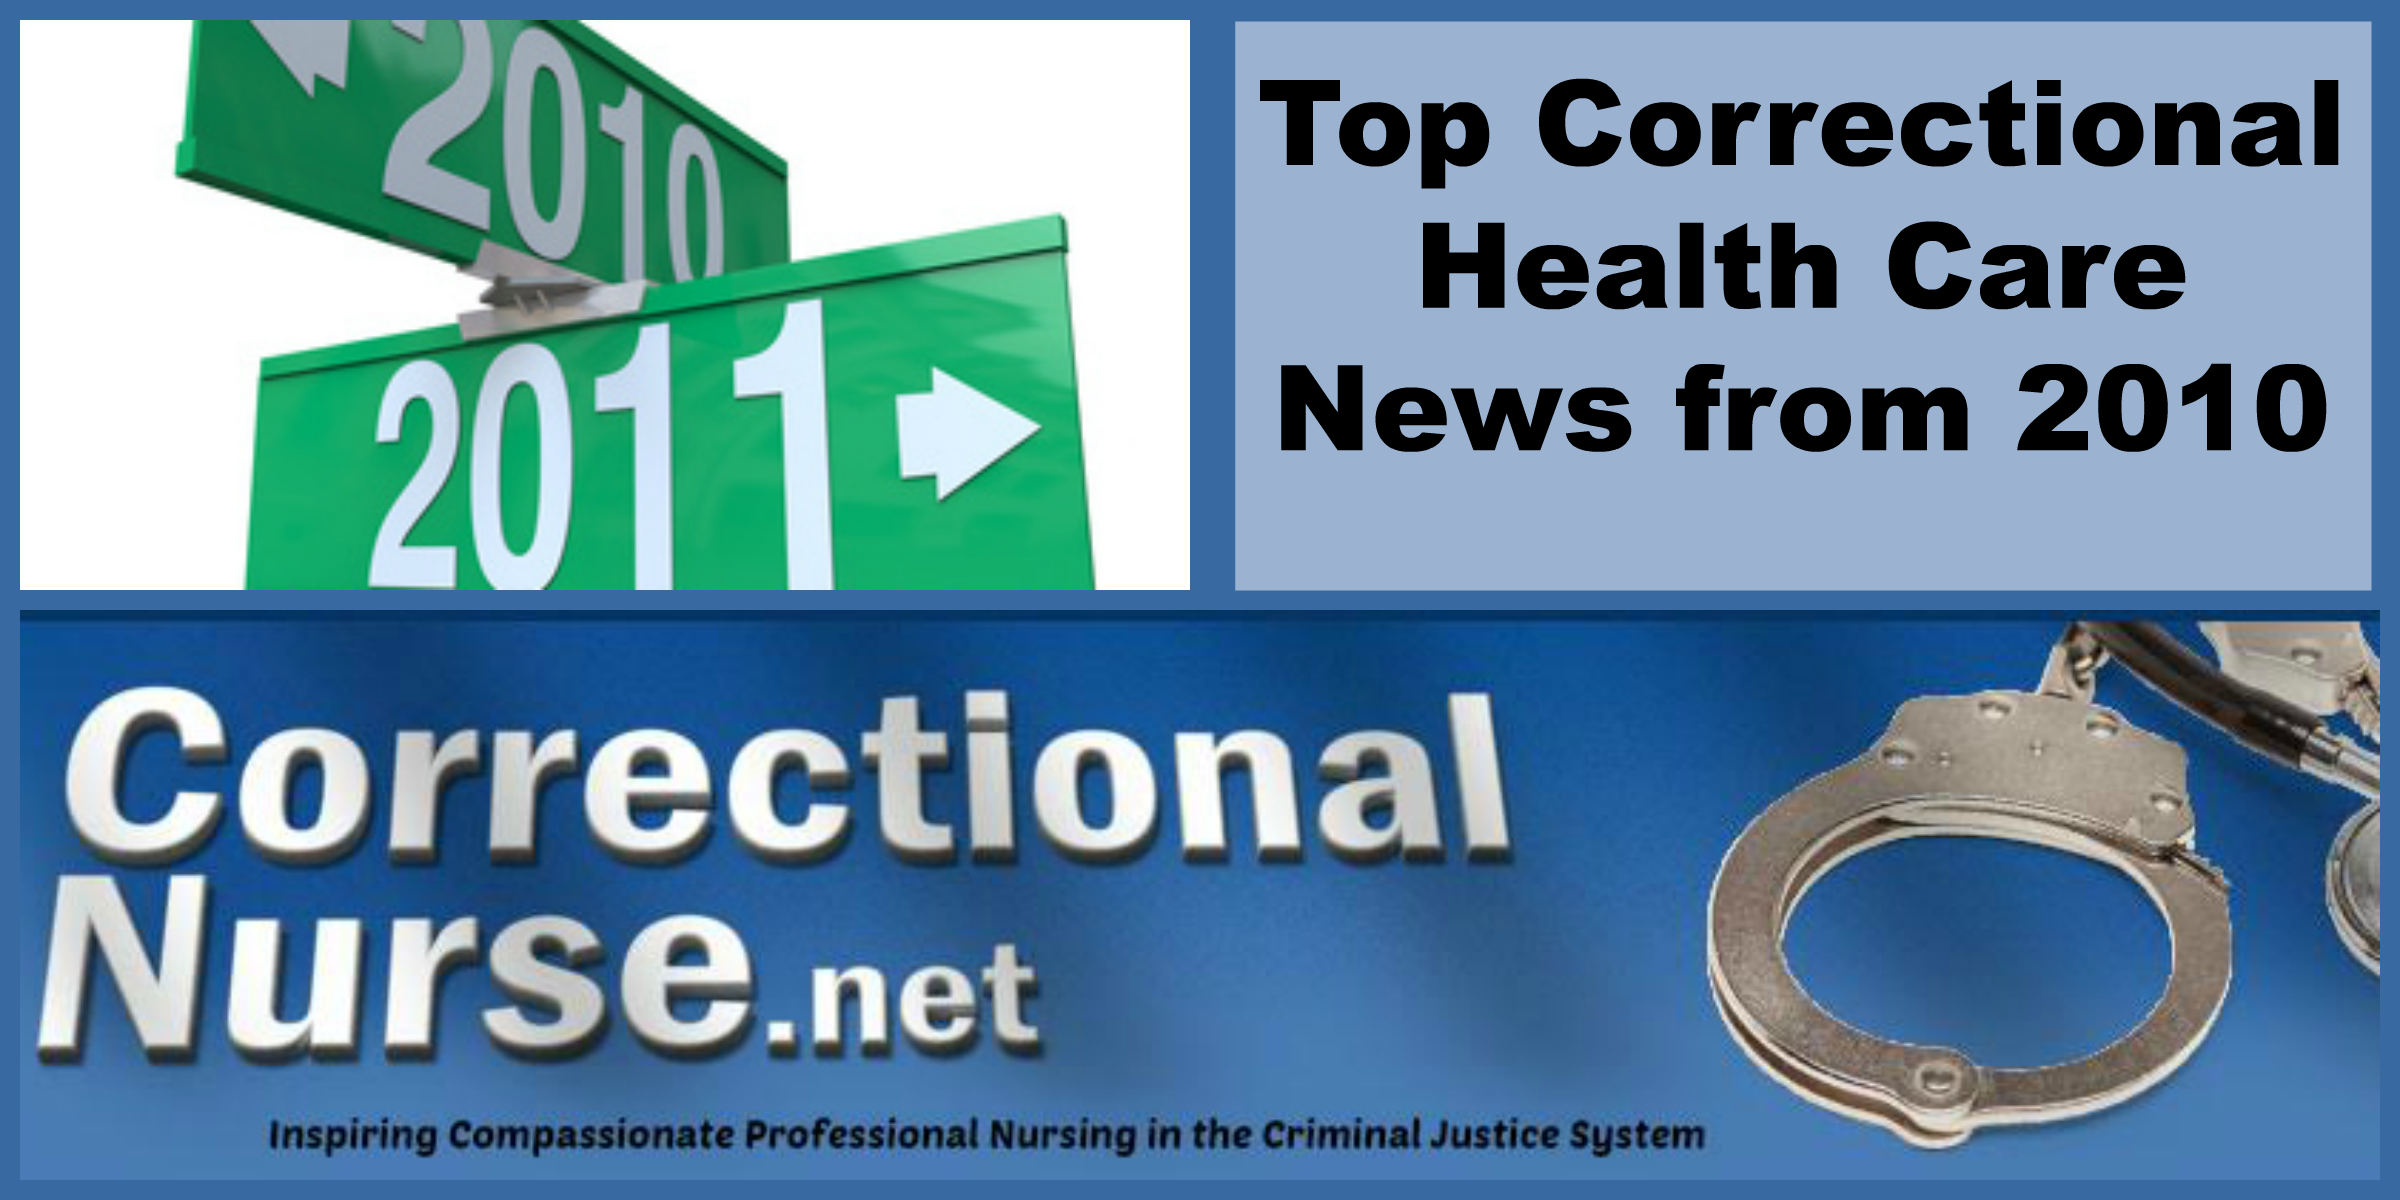 Top Correctional Health Care News from 2010